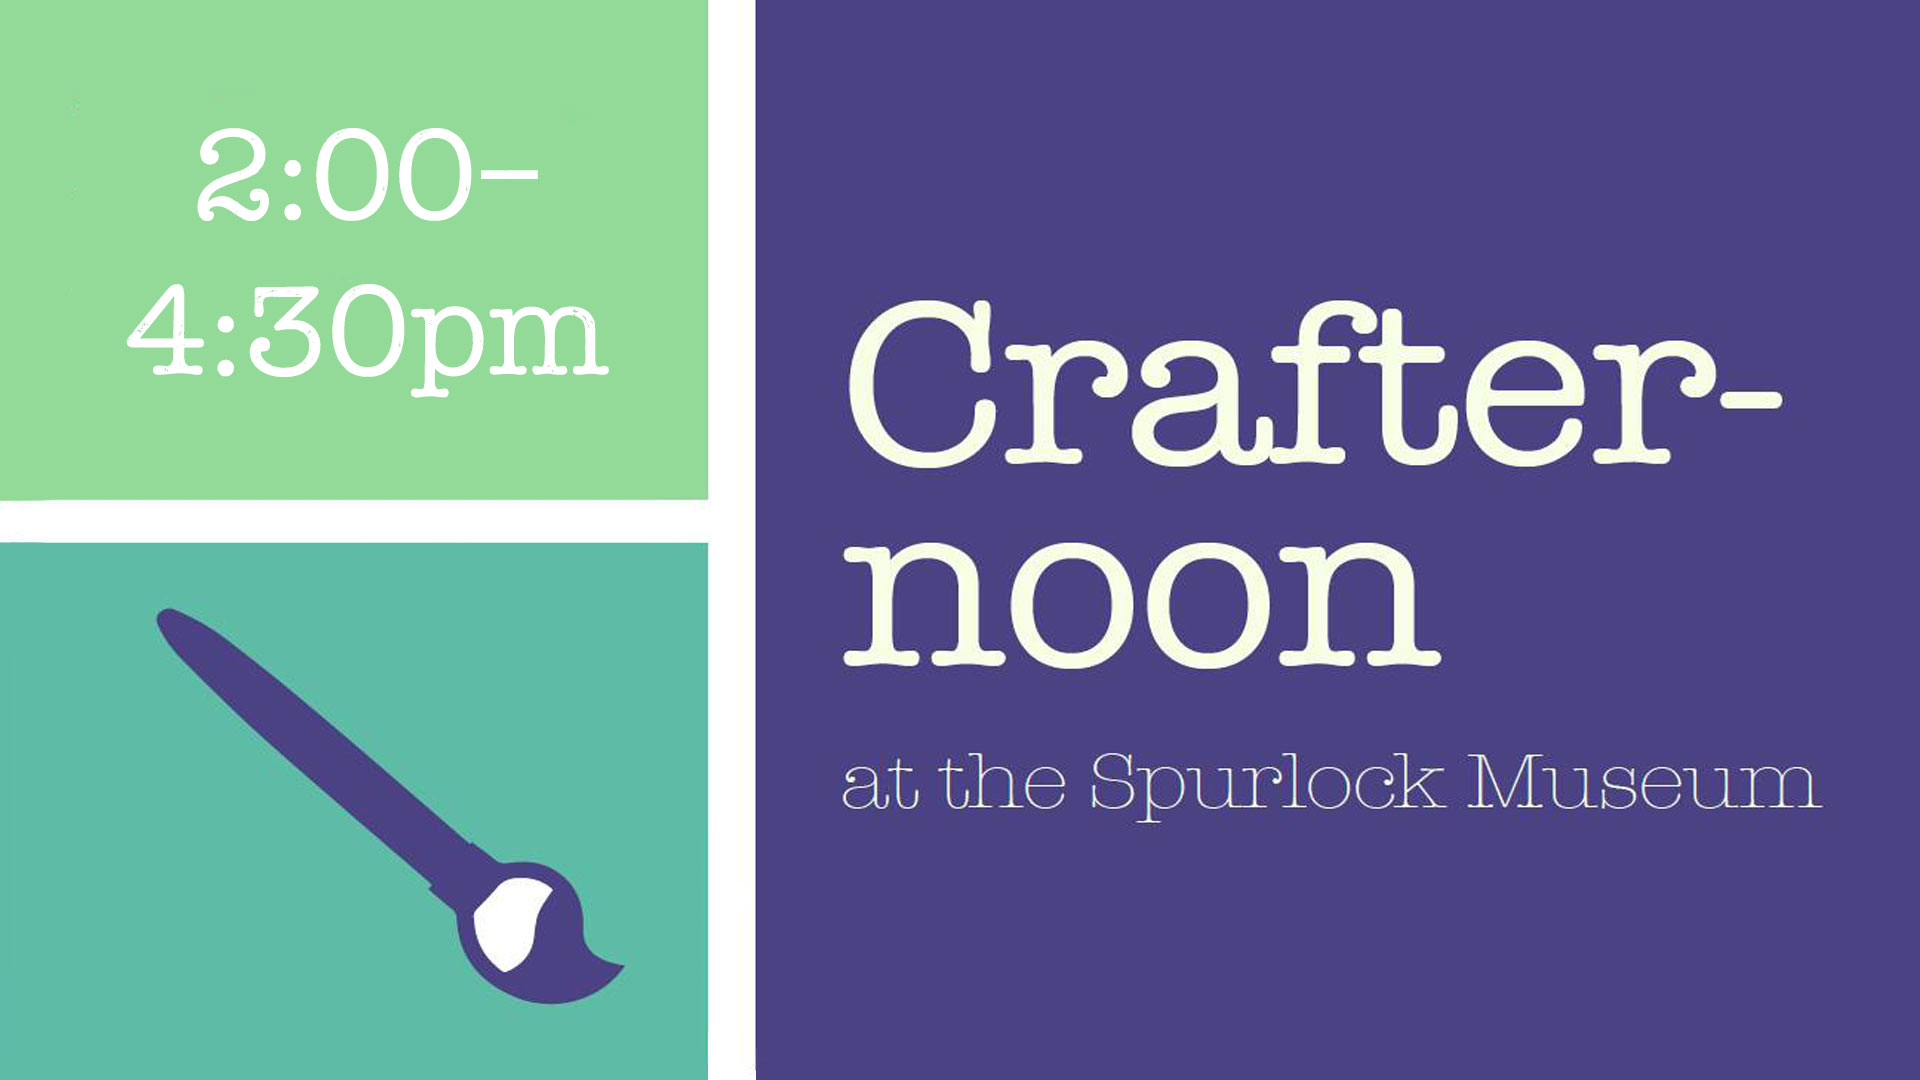 Crafternoon poster with paintbrush illustration and text reading Crafternoon at the Spurlock Museum 2:00 - 4:30 pm 